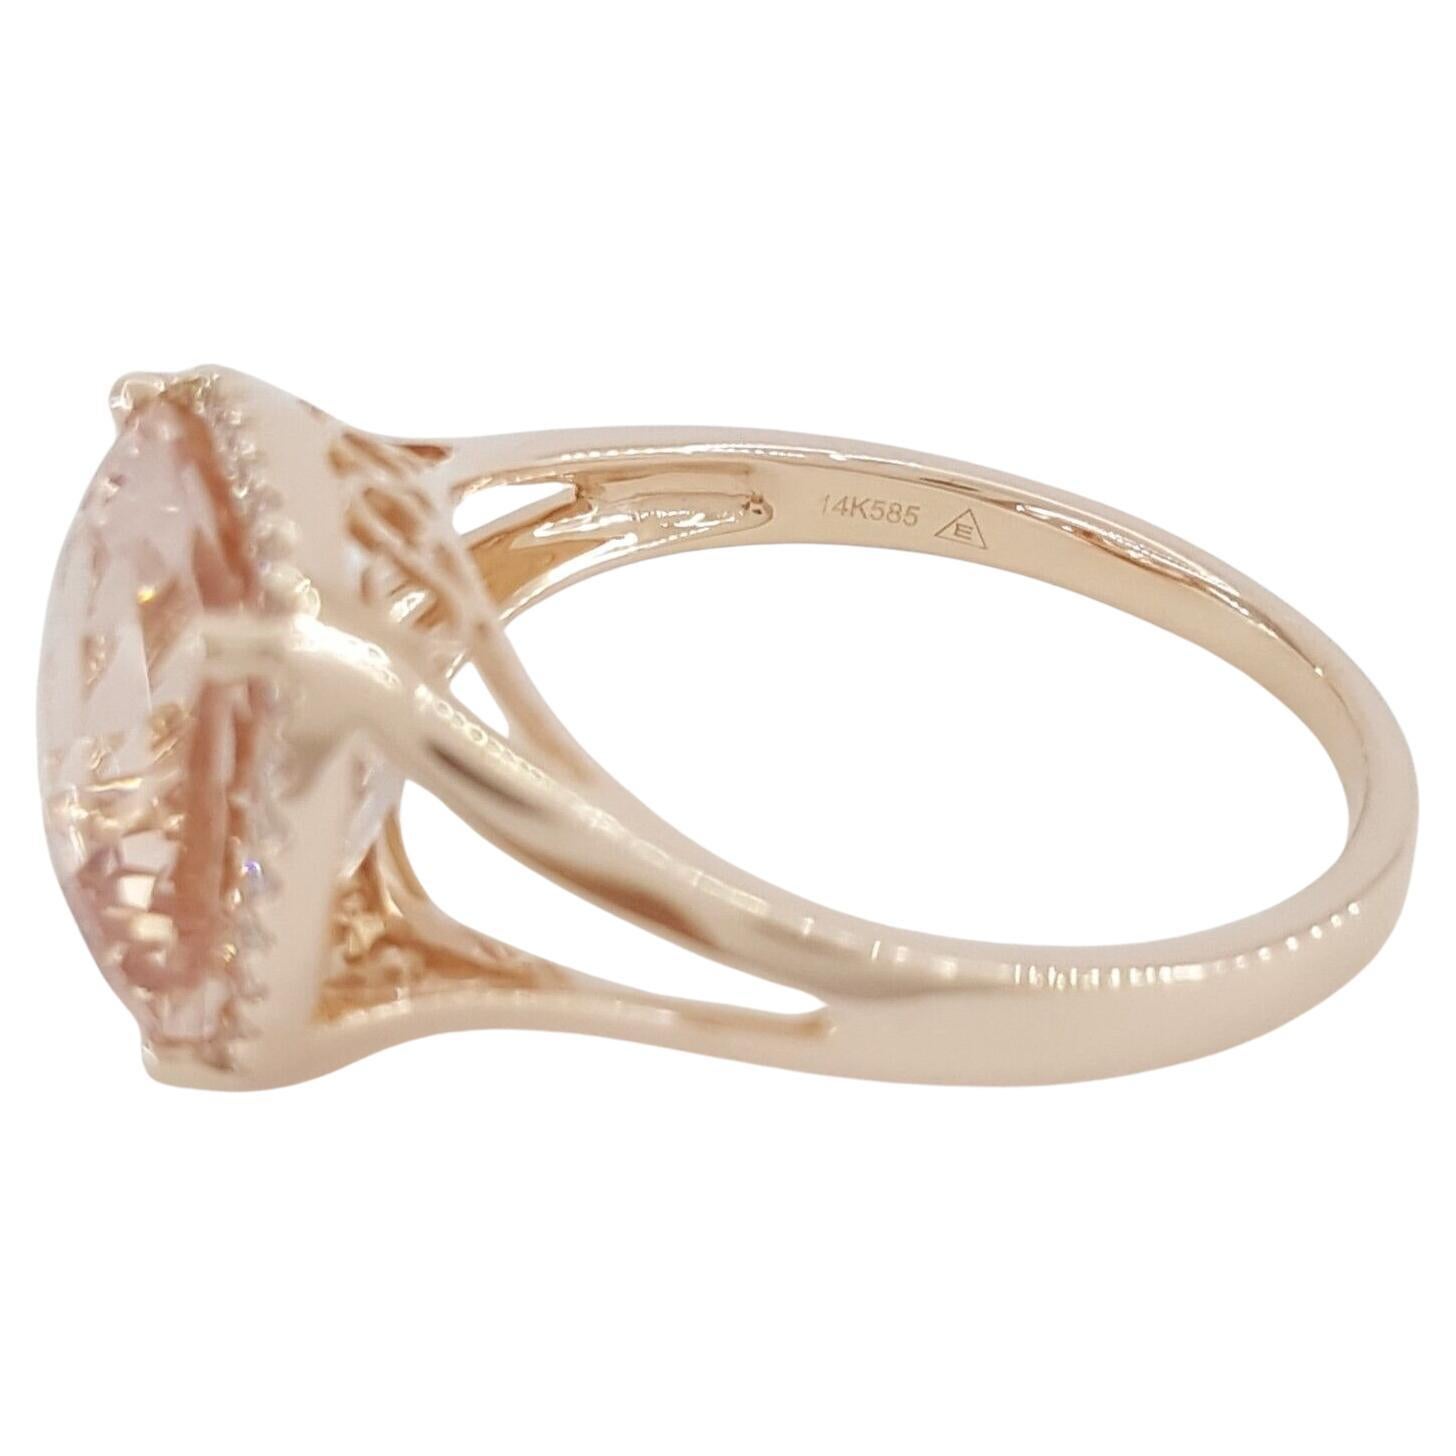 Embrace the elegance of this exquisite 14K rose gold ring, featuring a stunning centerpiece and sparkling diamond accents. This piece is not just a ring, but a statement of style and sophistication.

Key Features:
- At the heart of the ring is a